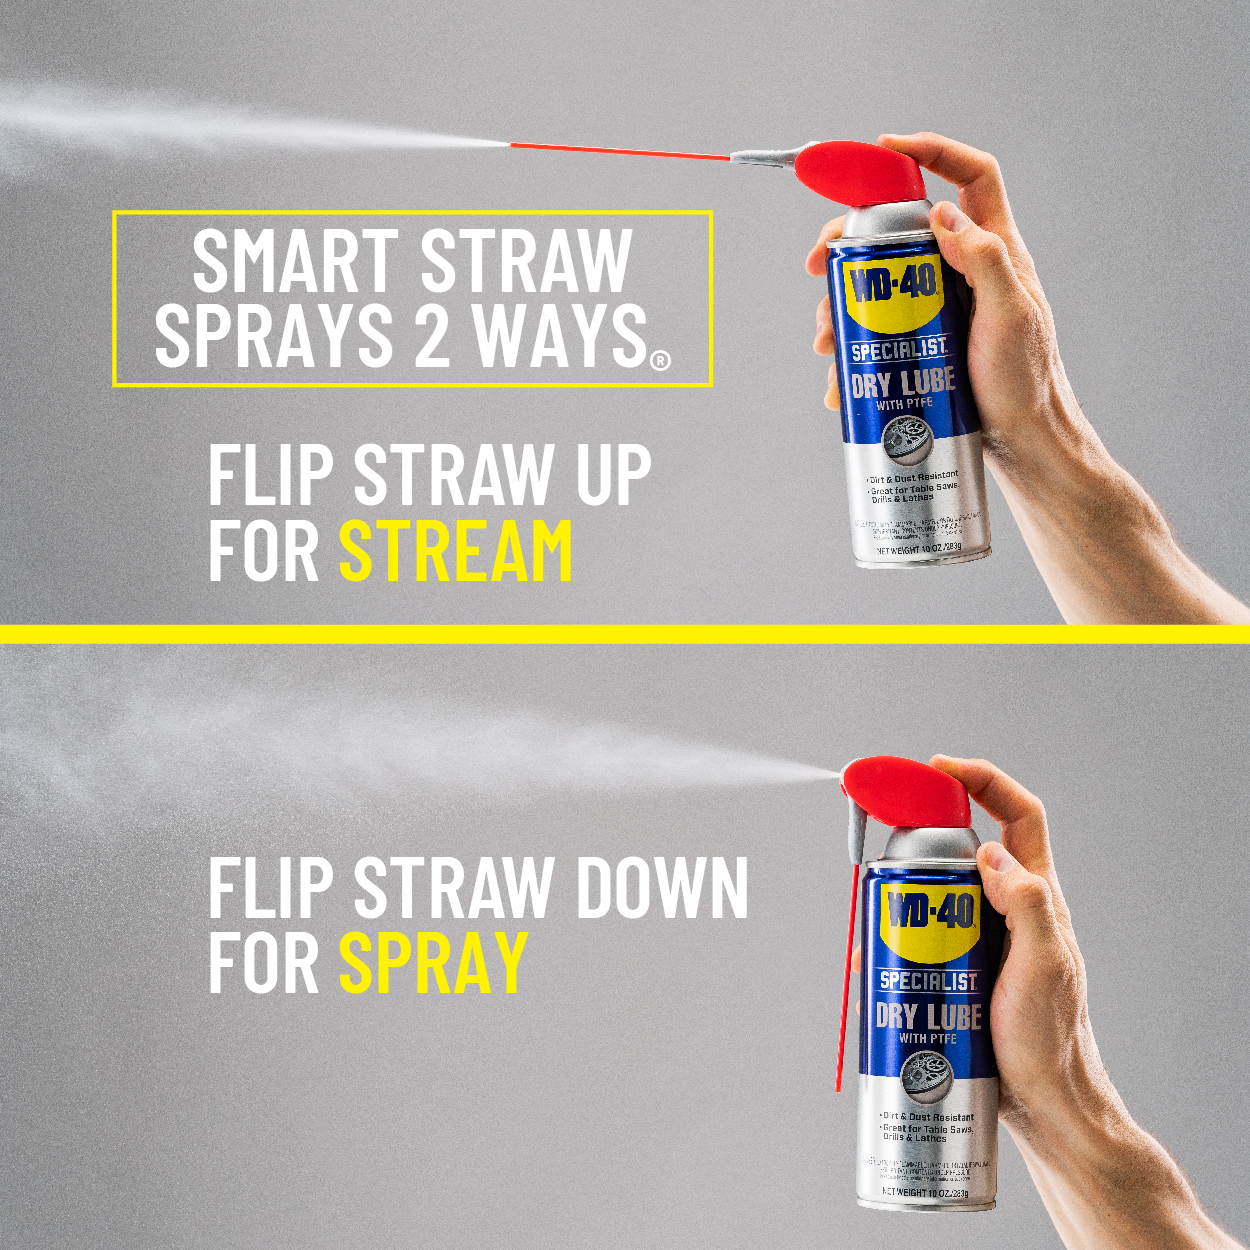 WD-40 Specialist Dry Lube with PTFE, Lubricant with Smart Straw Spray, 10 oz - image 3 of 9